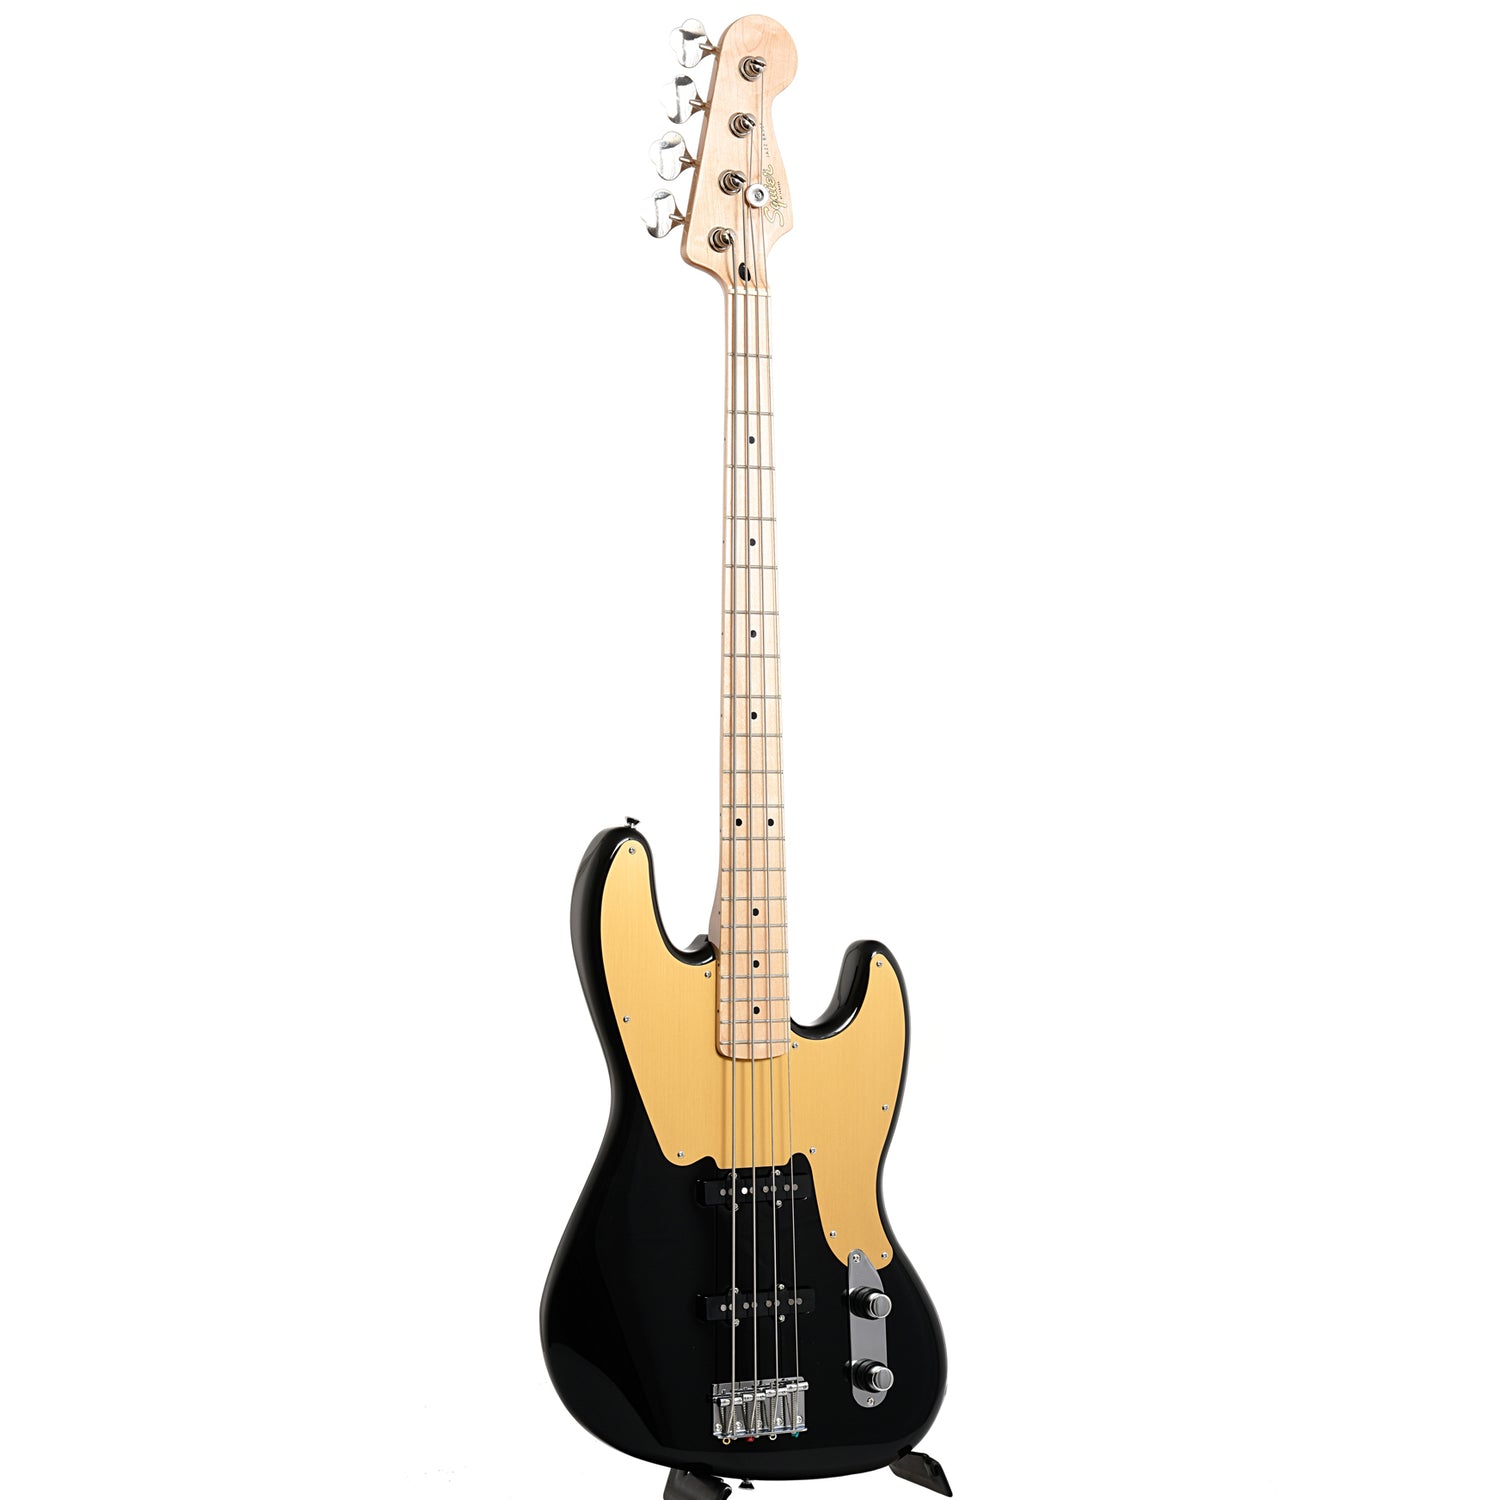 Image 11 of Squier Paranormal Jazz Bass '54, Black - SKU# SPJB54BLK : Product Type Solid Body Bass Guitars : Elderly Instruments